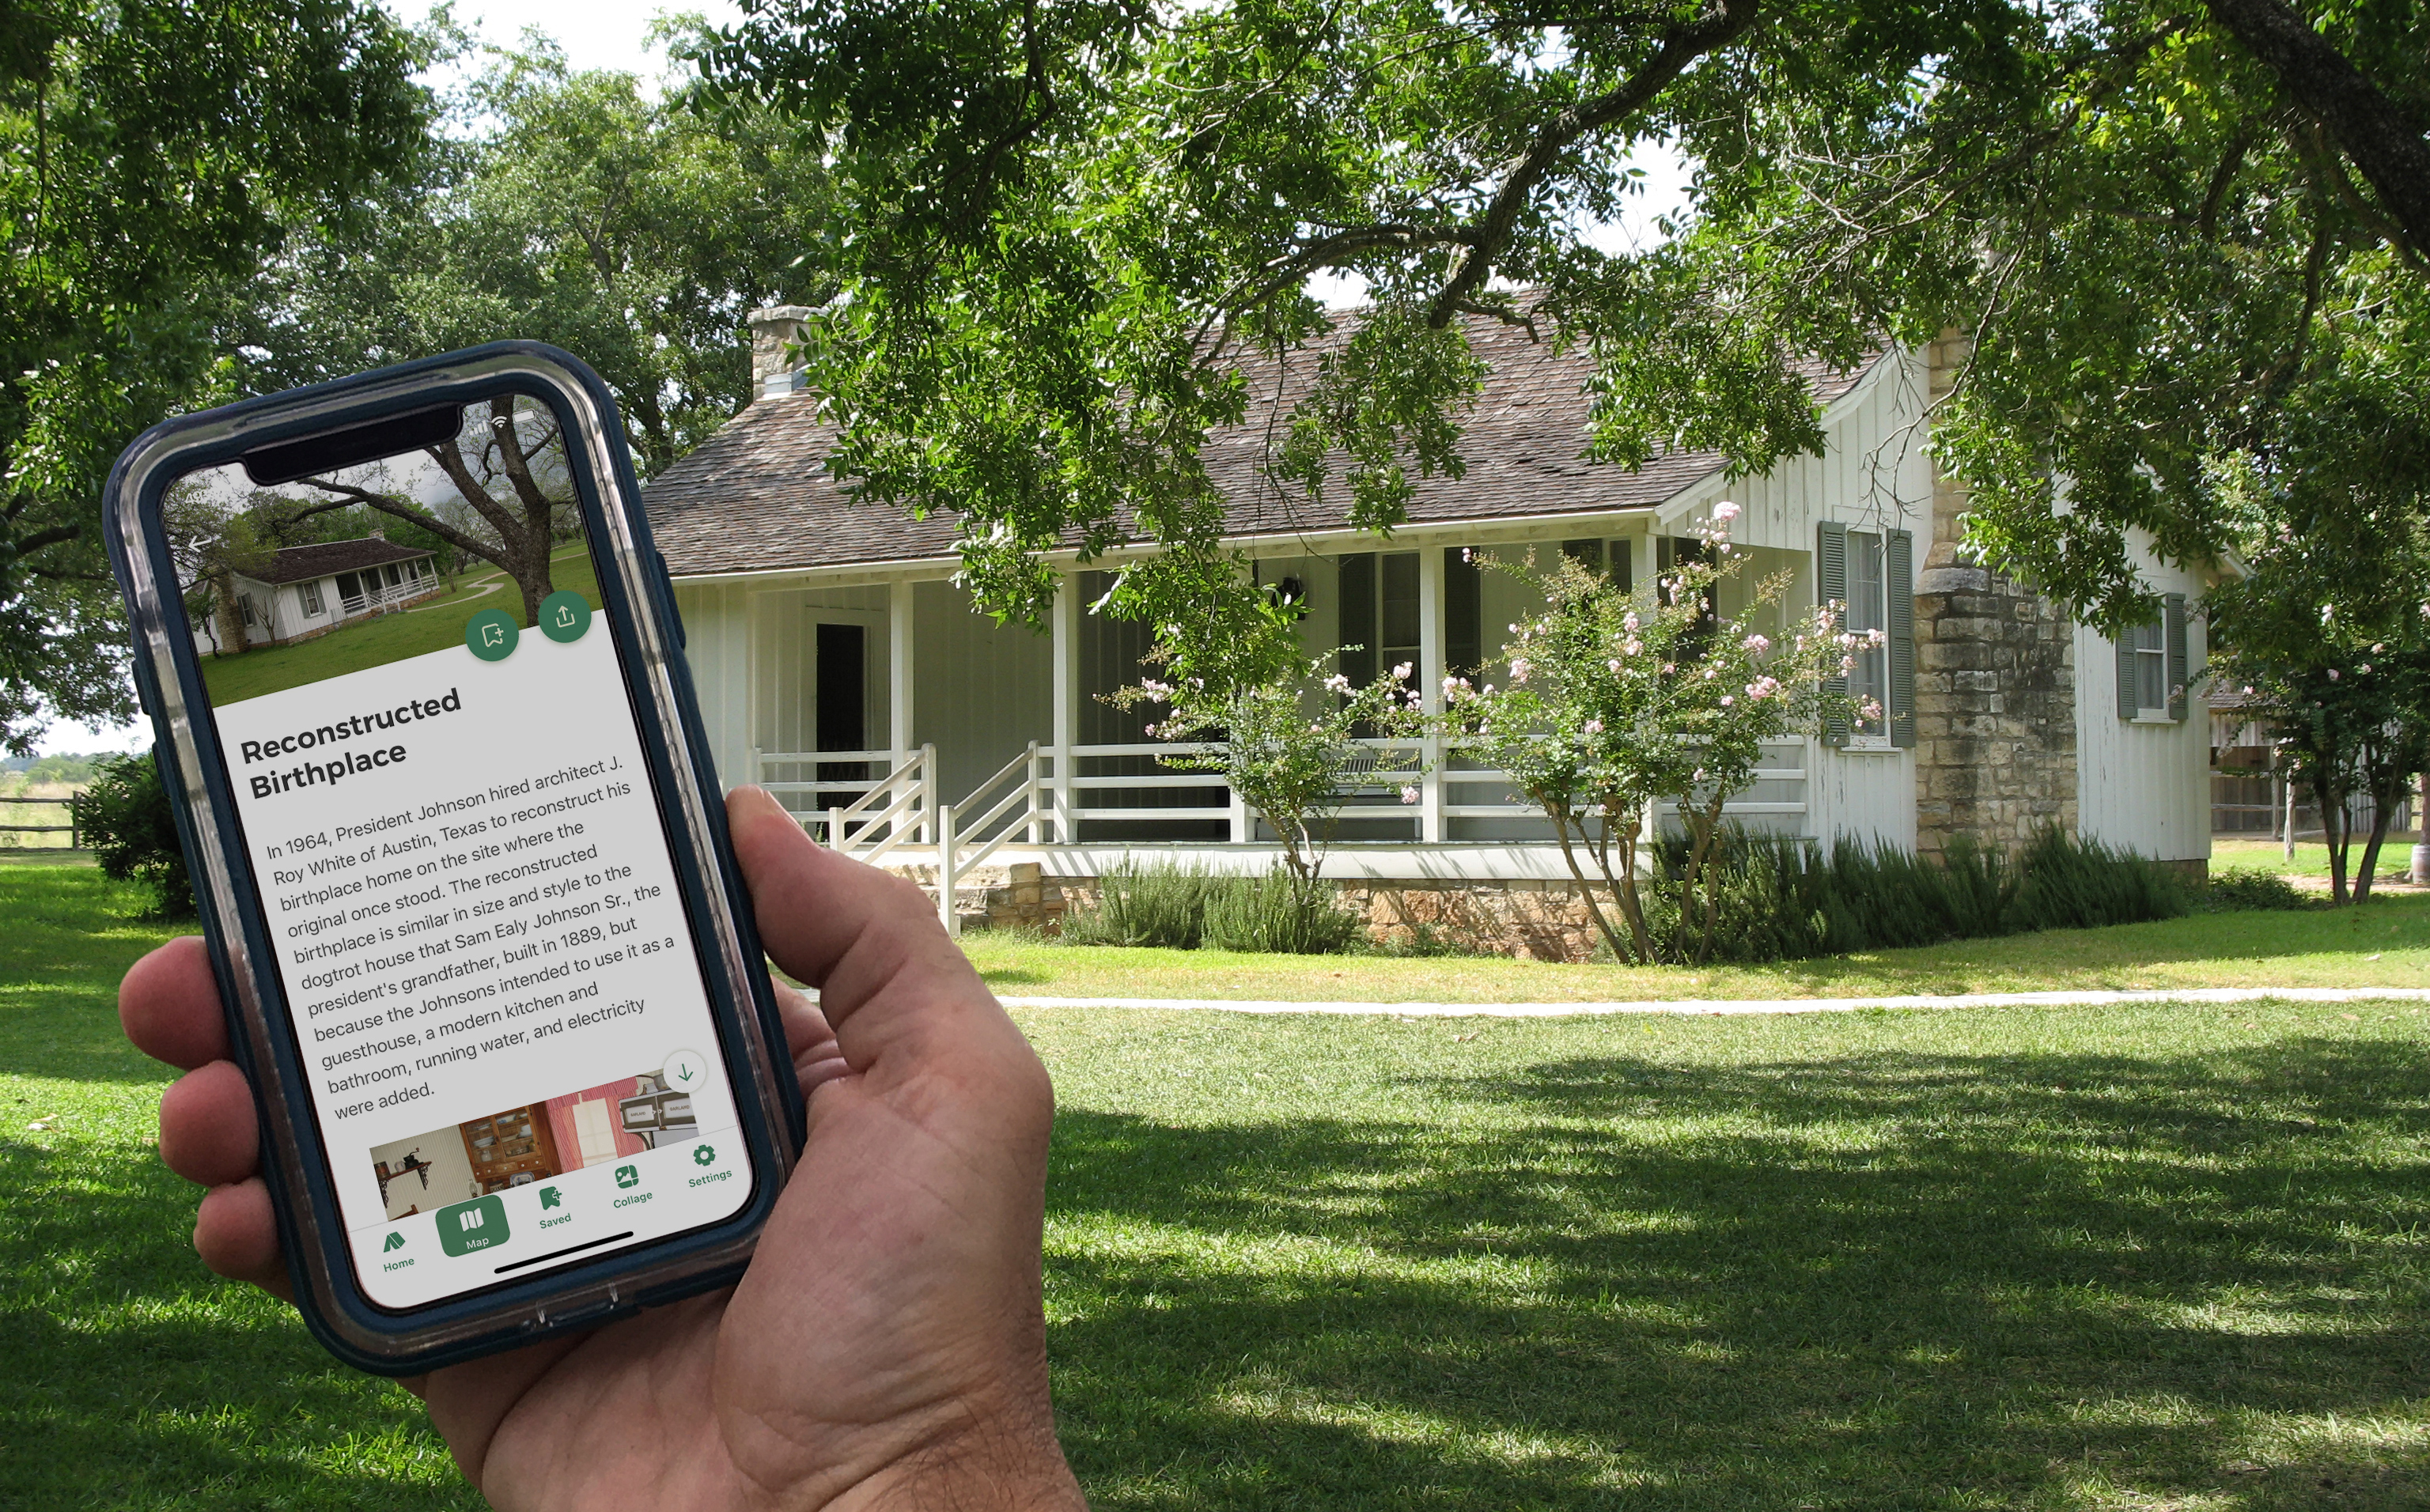 A hand holds a cell phone showing a screen titled "Reconstructed Birthplace." In the background is a small, white frame house.